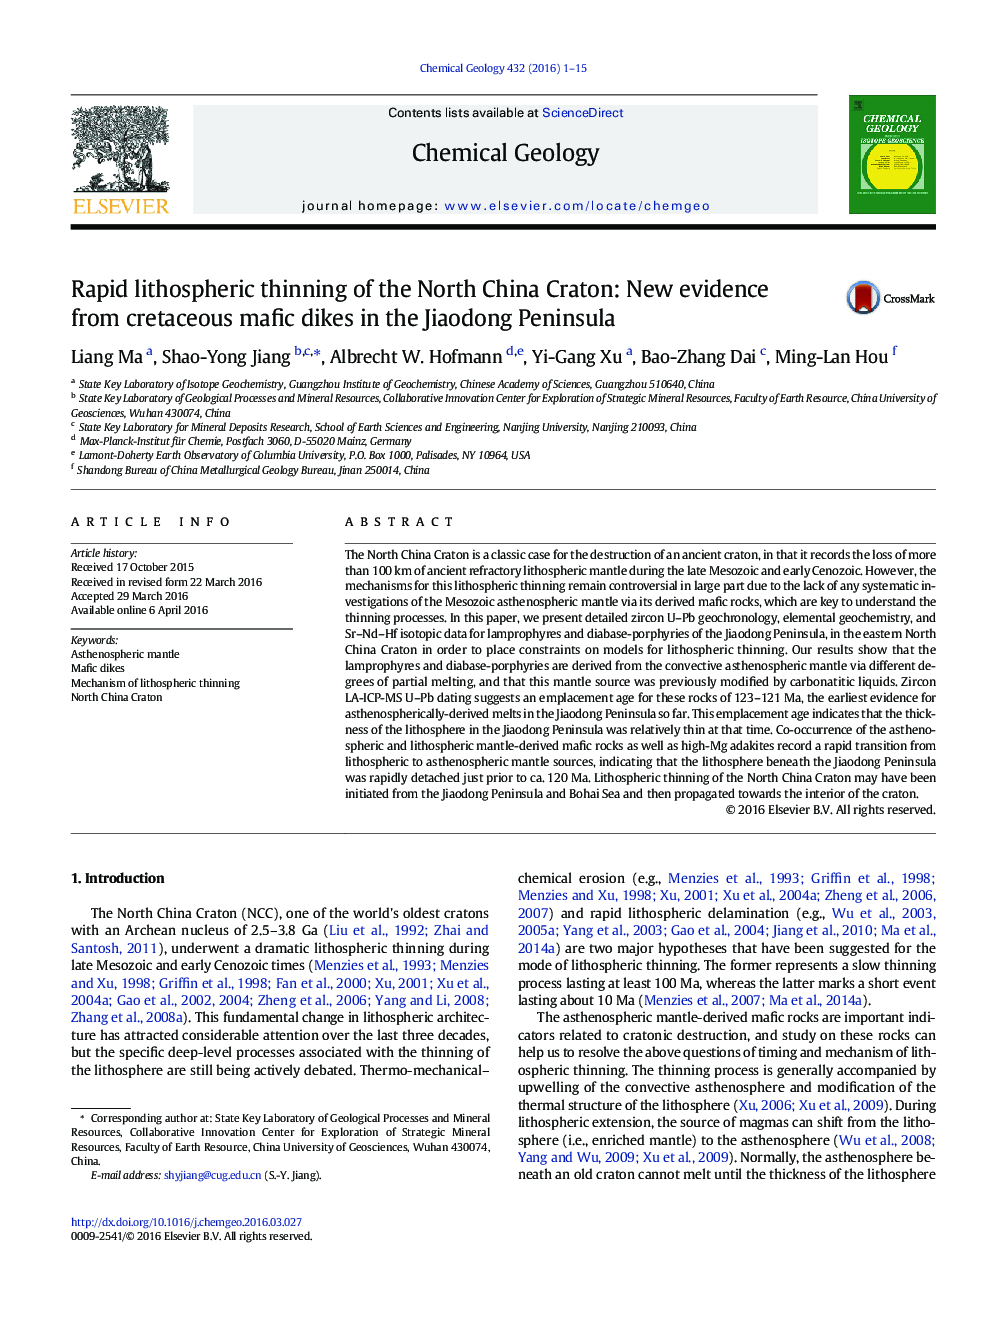 Rapid lithospheric thinning of the North China Craton: New evidence from cretaceous mafic dikes in the Jiaodong Peninsula